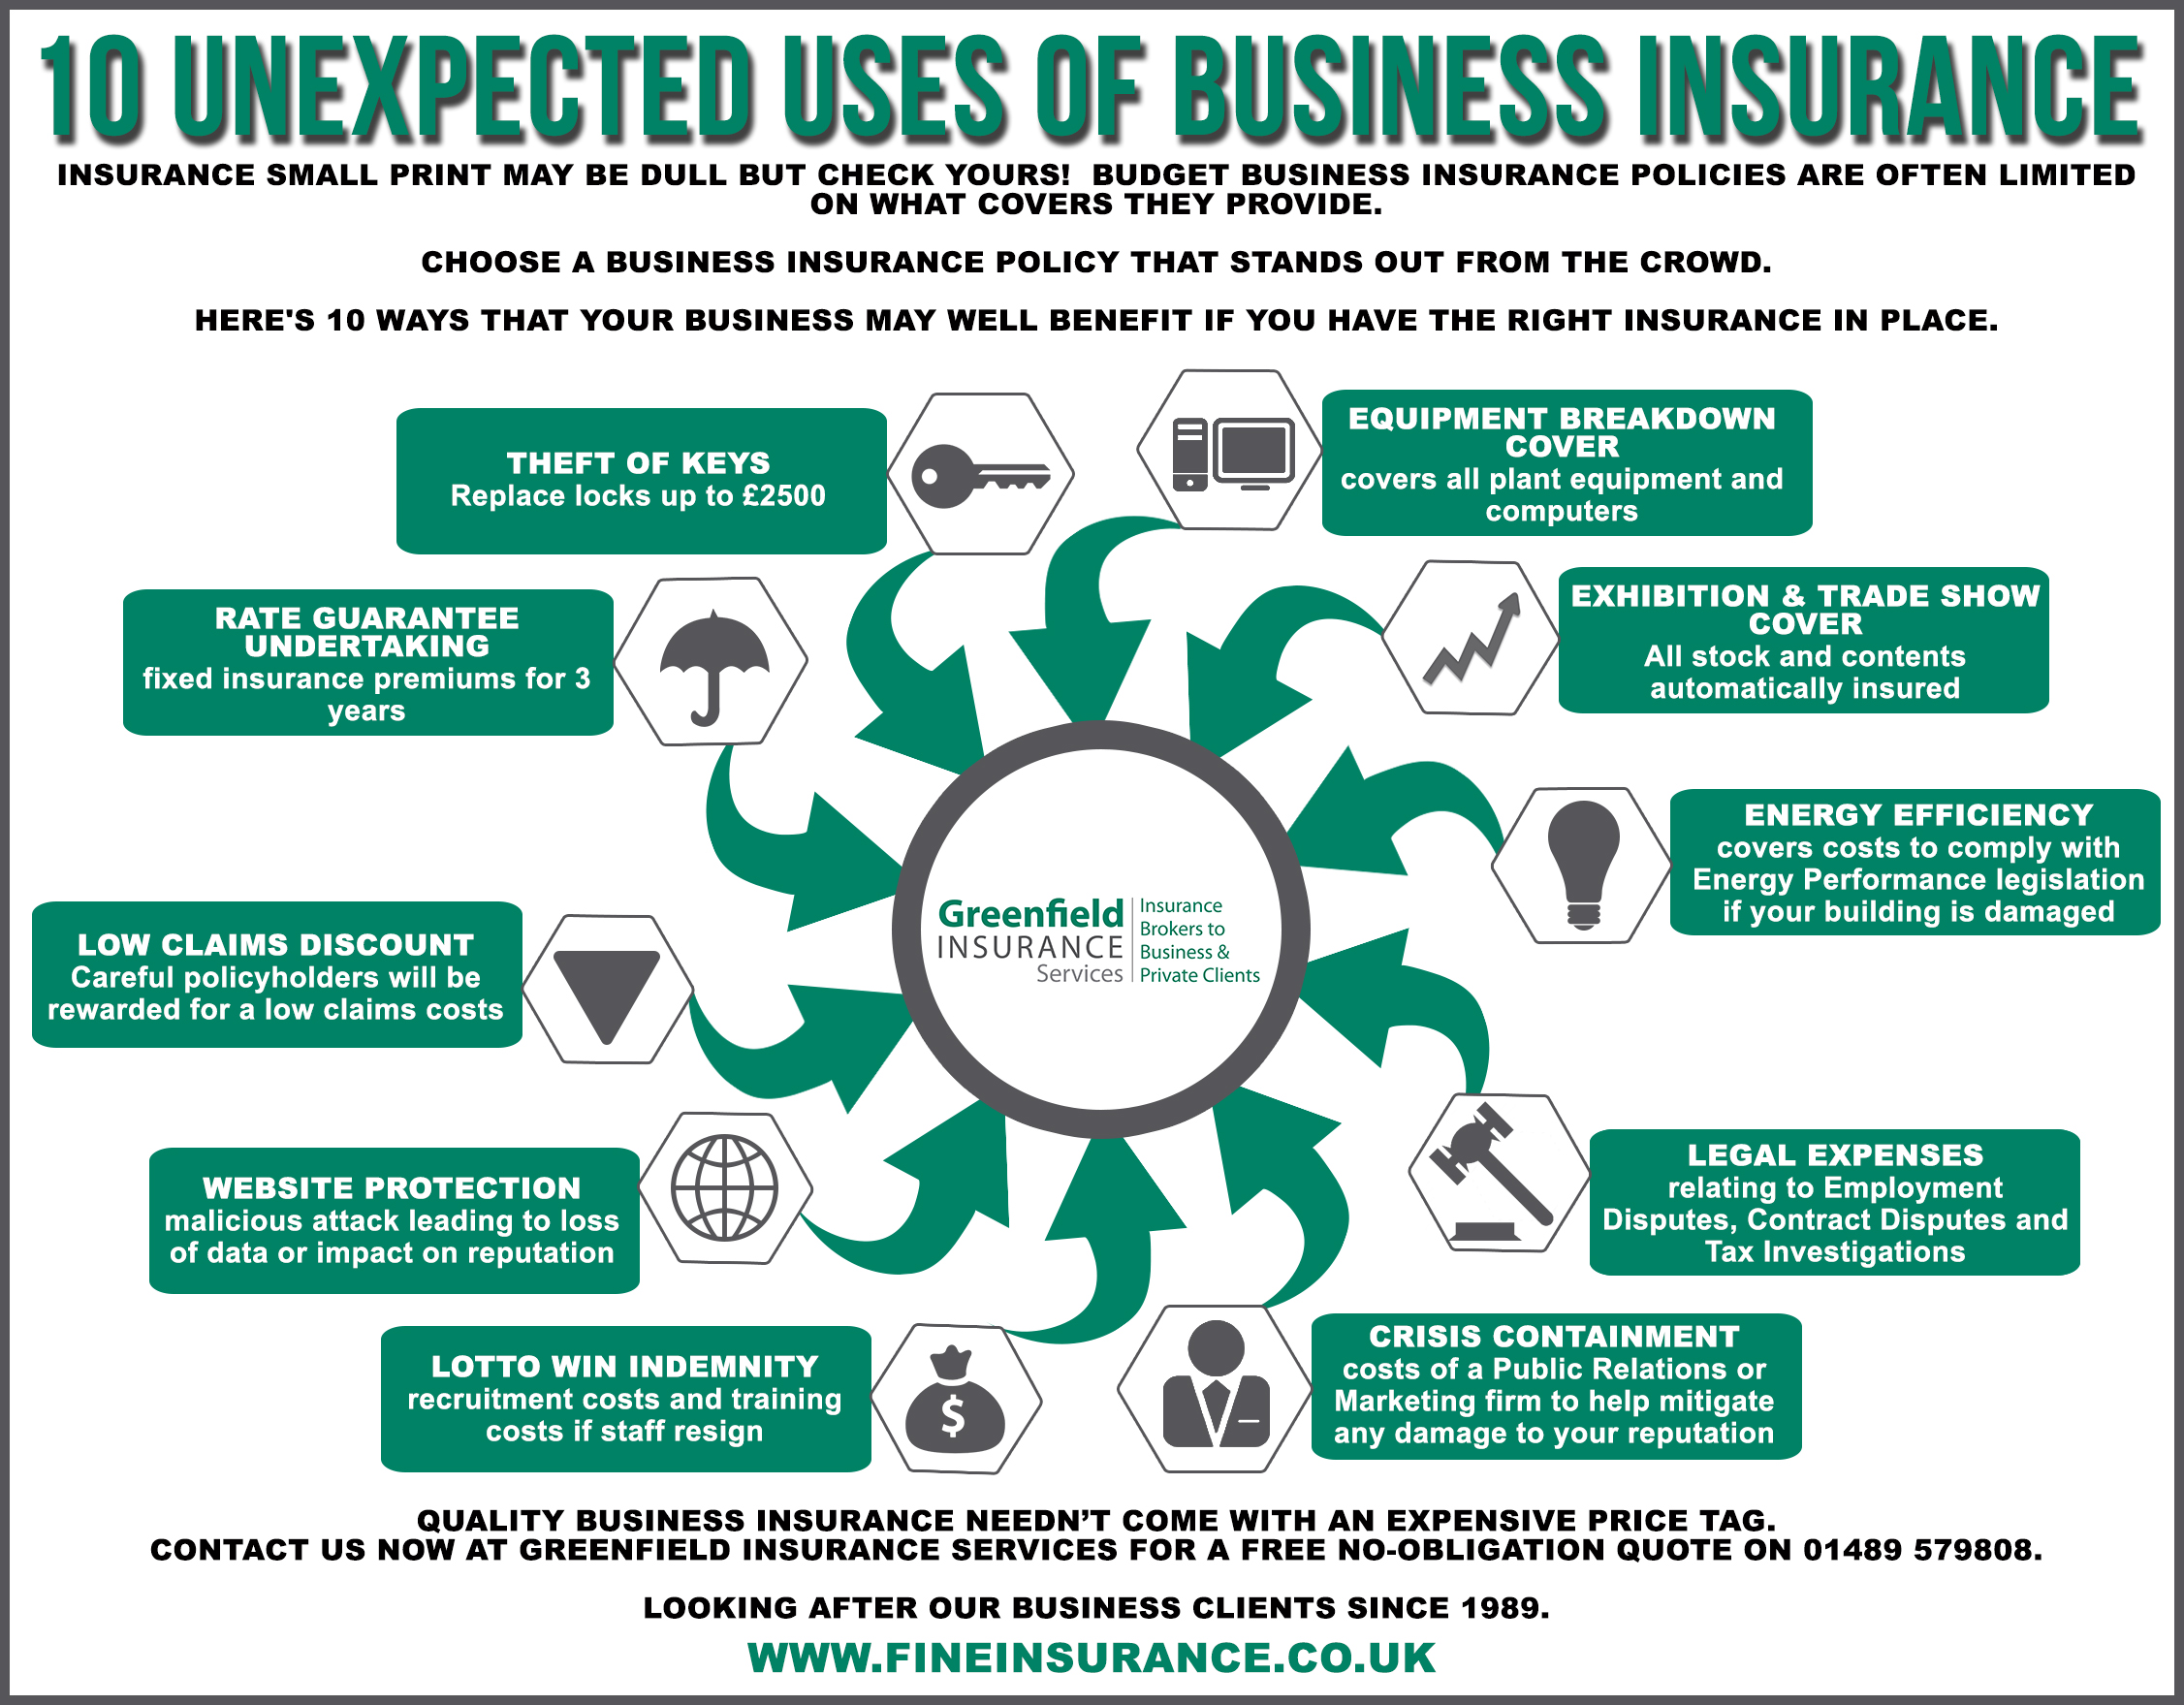 10 Unexpected Uses of Business Insurance